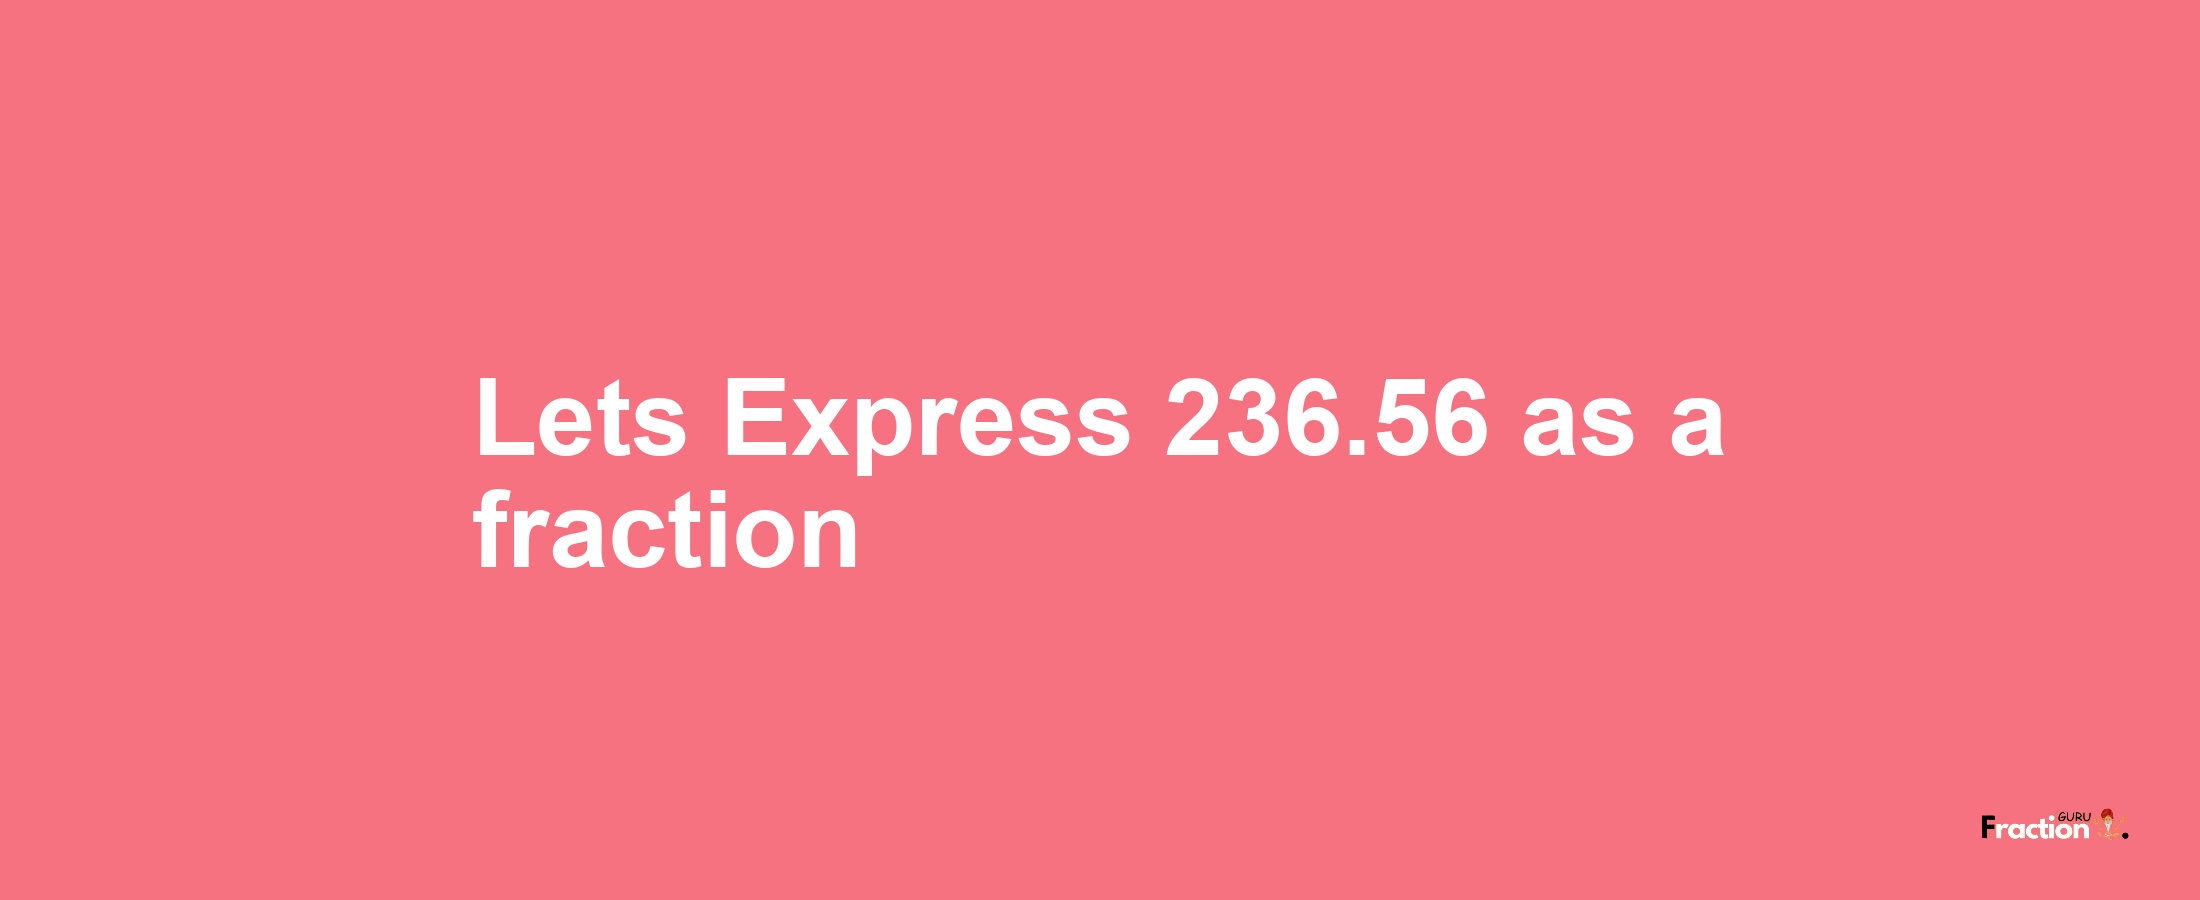 Lets Express 236.56 as afraction